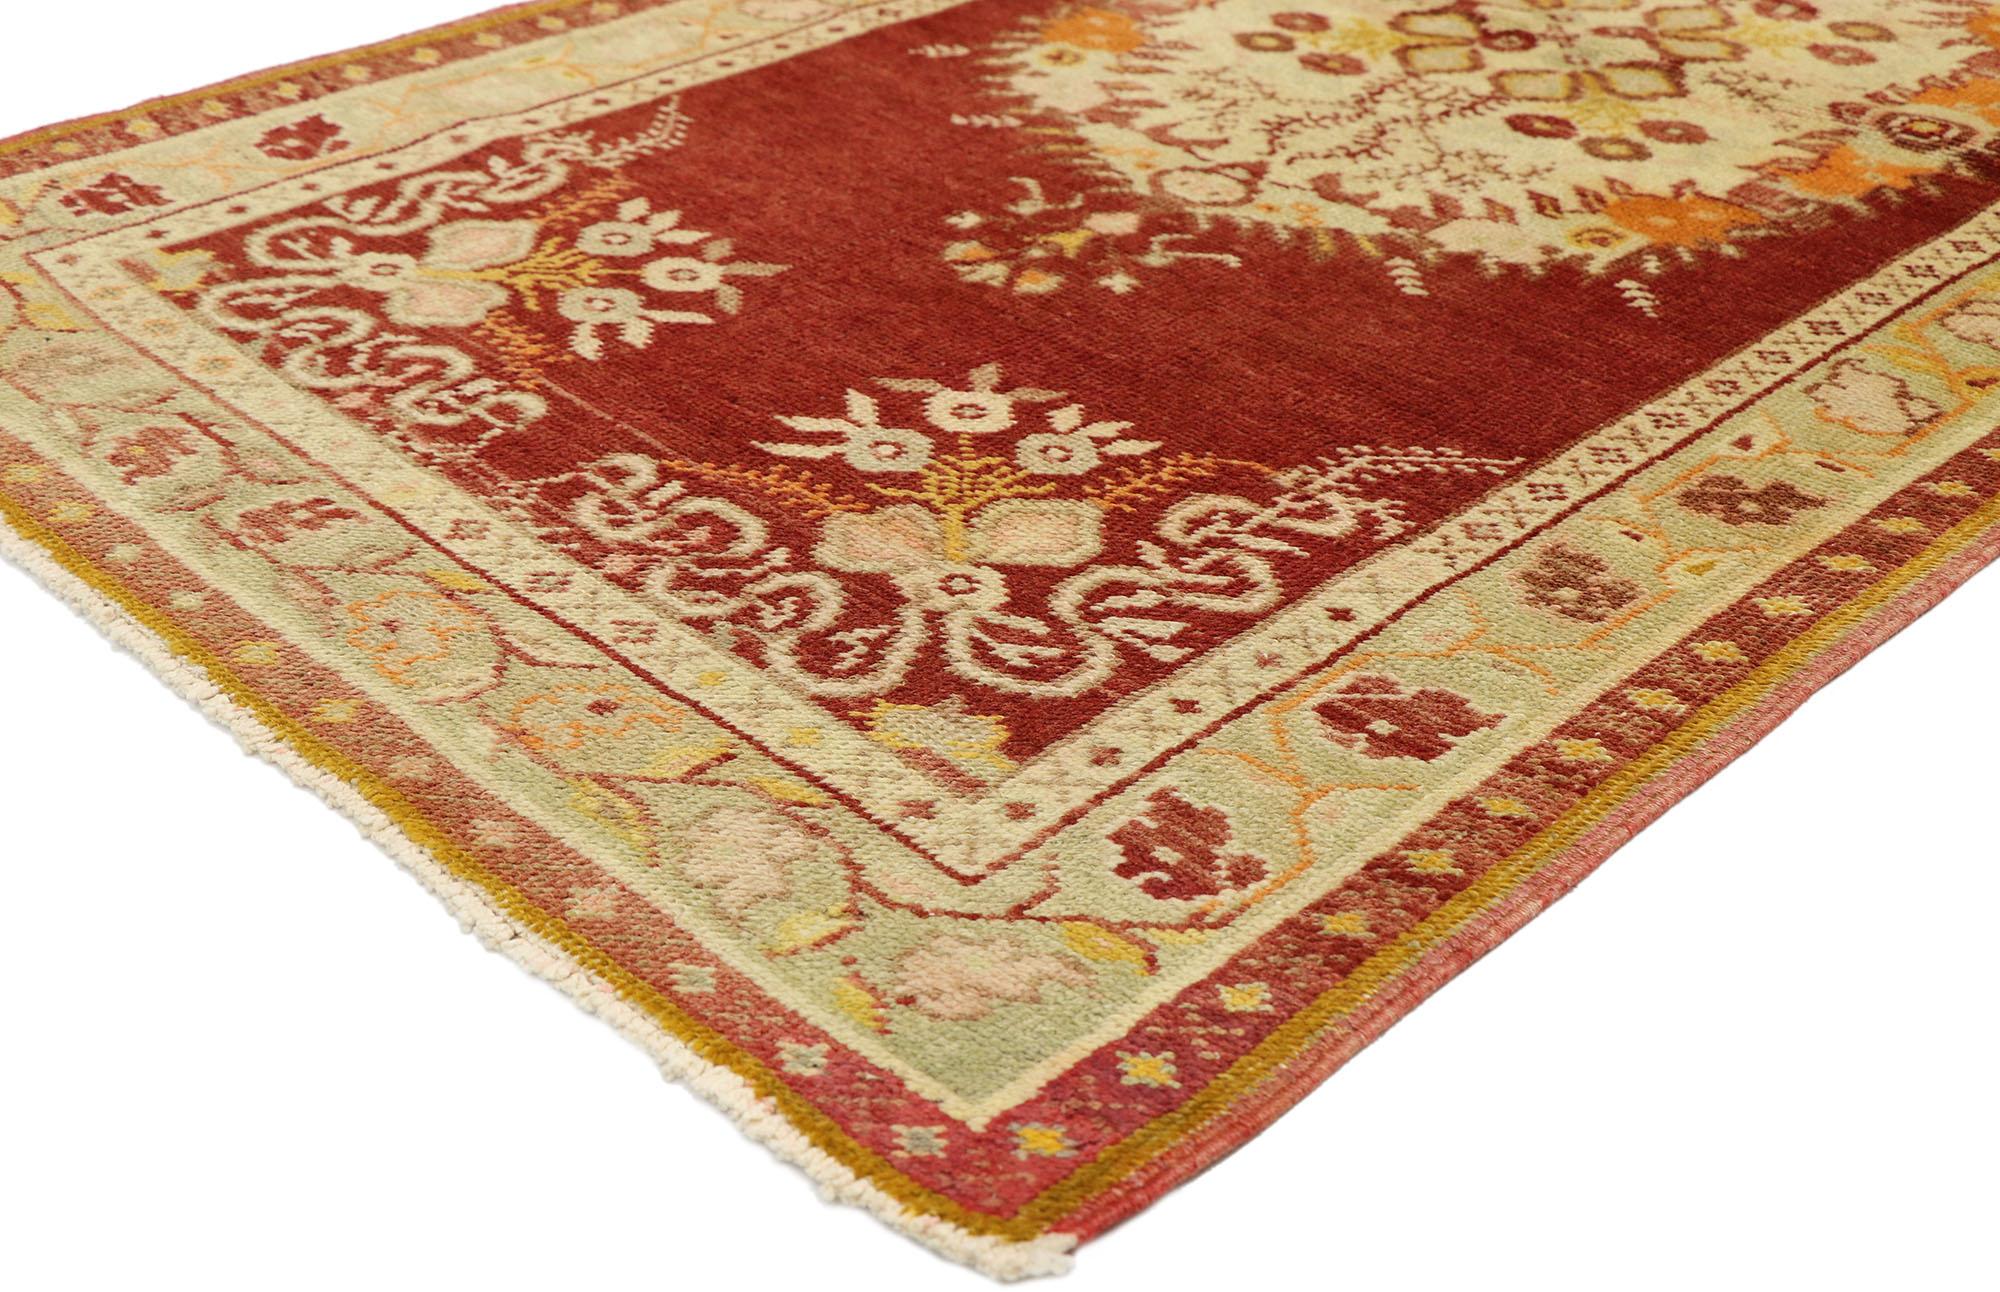 50996, vintage Turkish Oushak rug with French Rococo style, kitchen, foyer or entry rug. French Rococo Romanticism meets timeless Anatolian tradition in this Classic style vintage Turkish Oushak rug. Set with an elaborate round-oval medallion